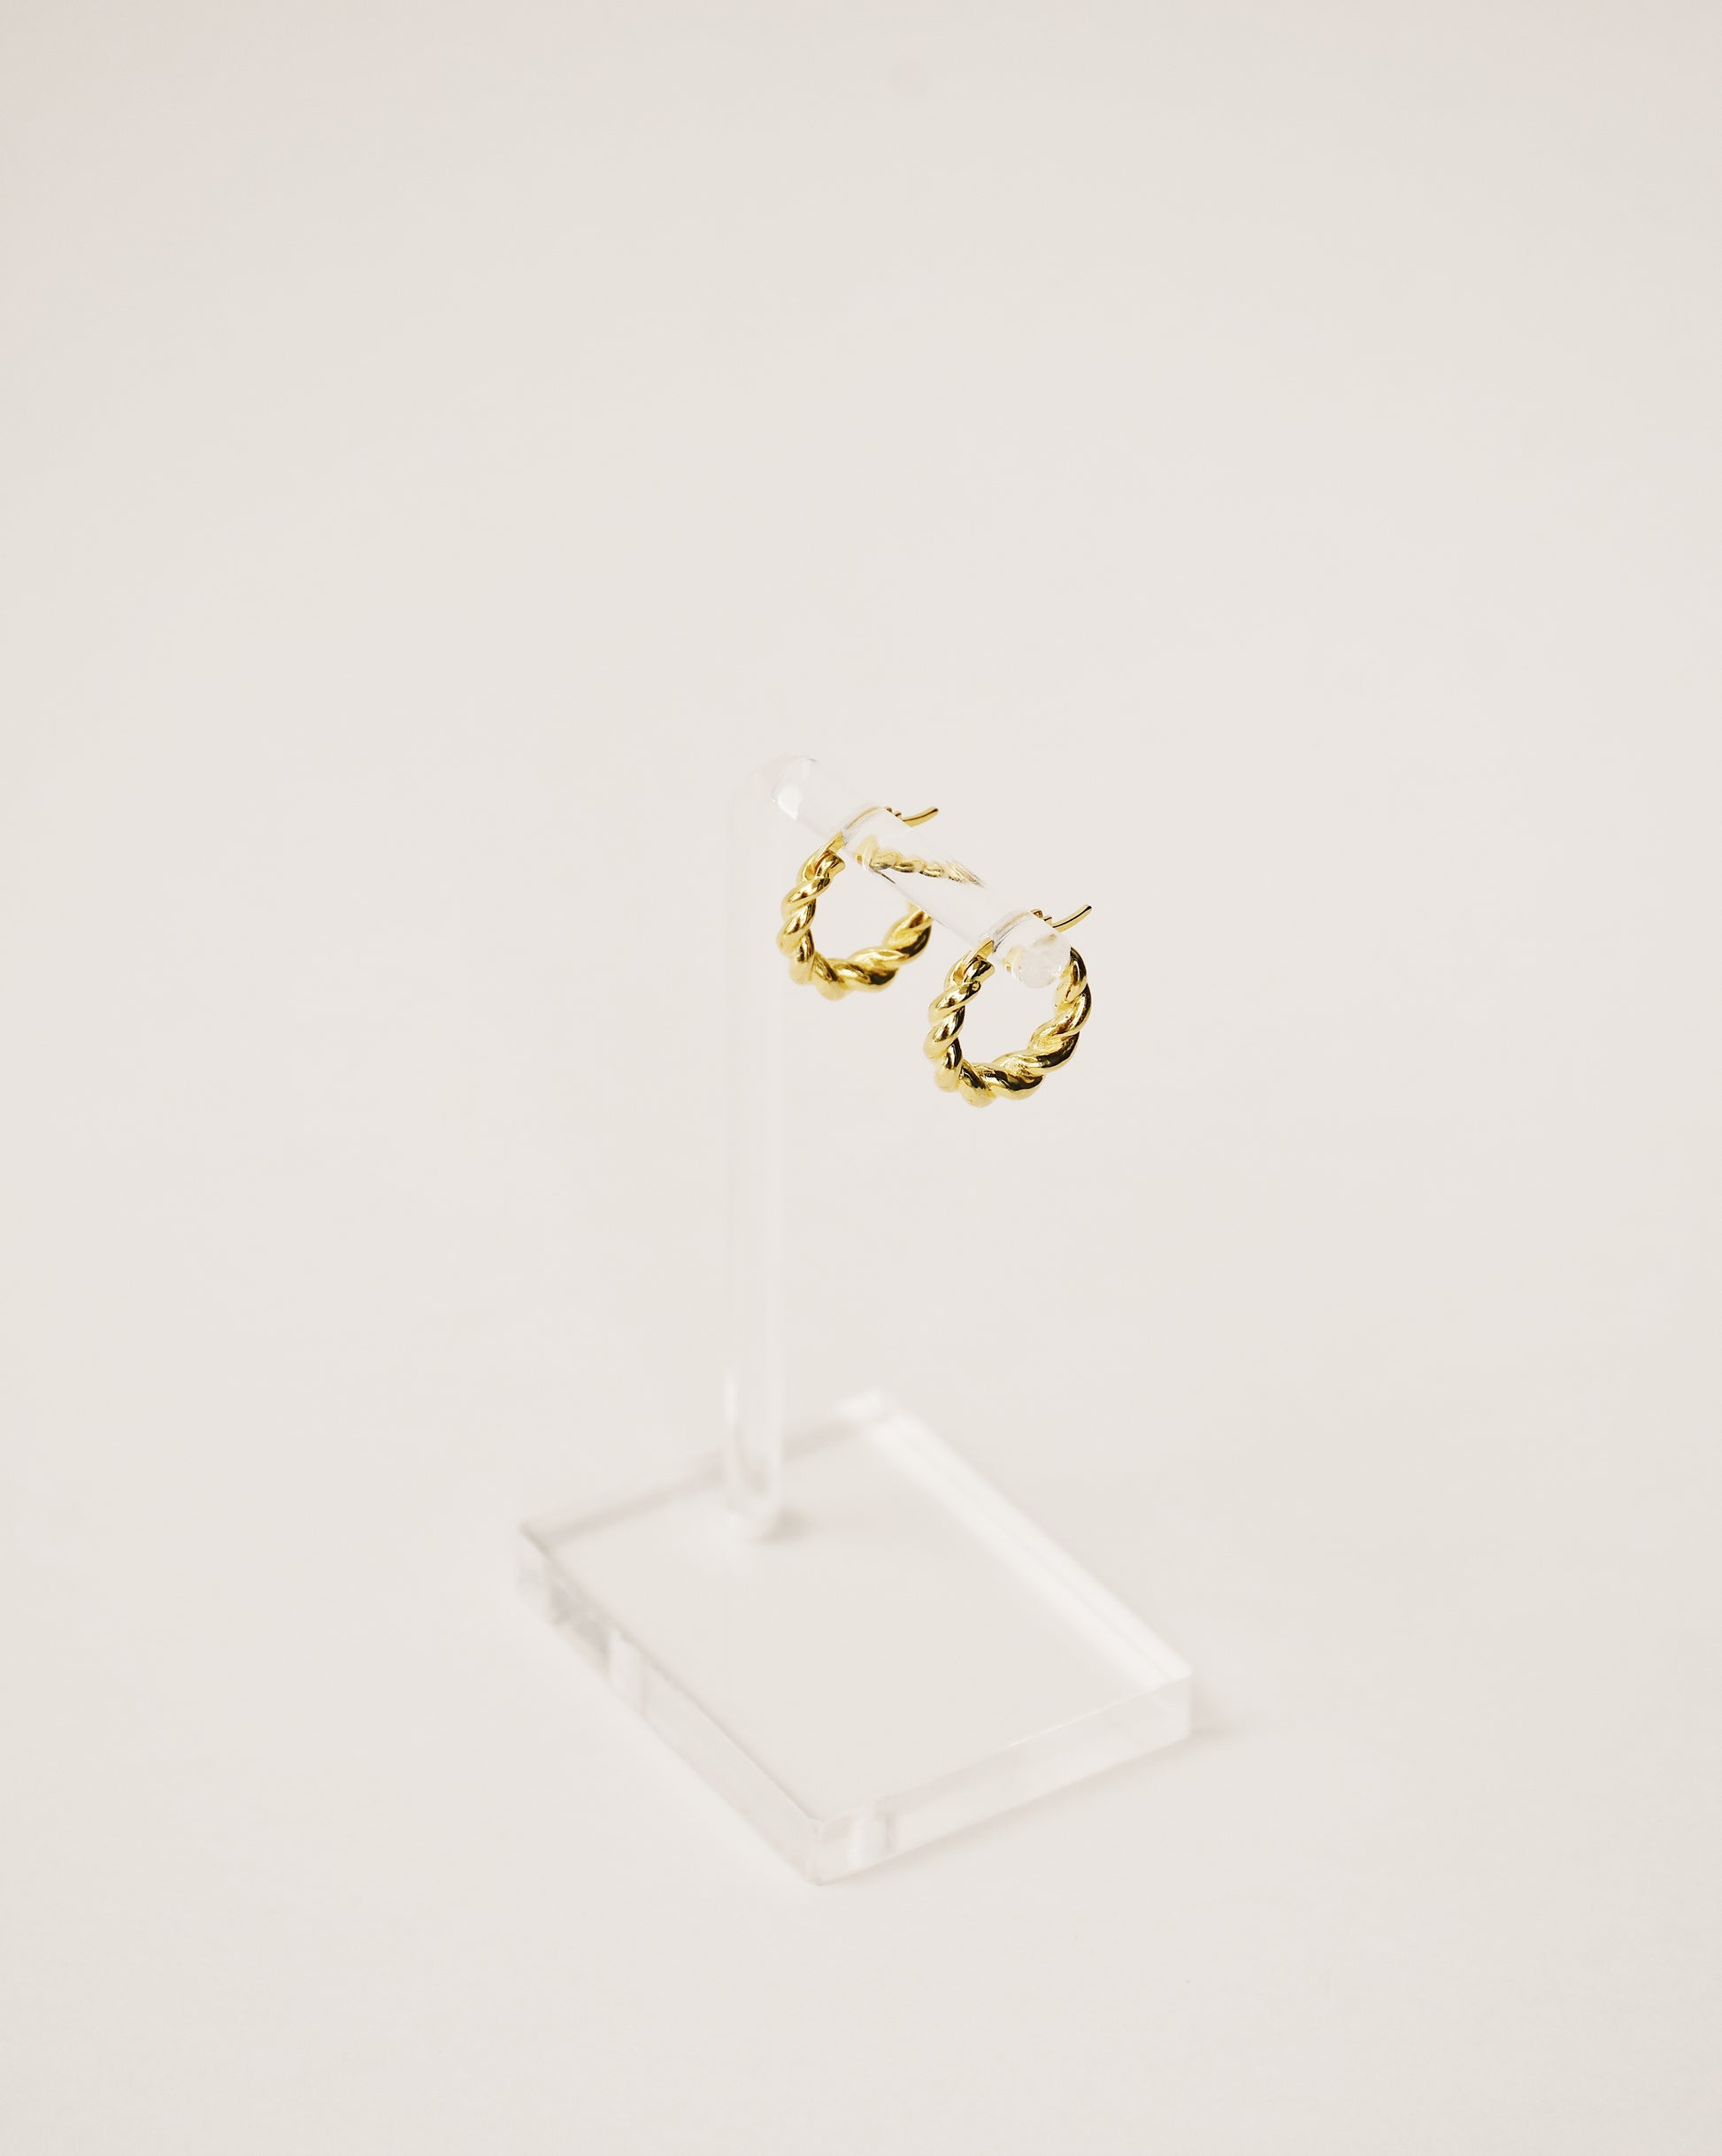 bold and modern twisted mini hoop earrings handcrafted from 925 sterling silver plated in 18k gold. 2020 slow fashion trend.